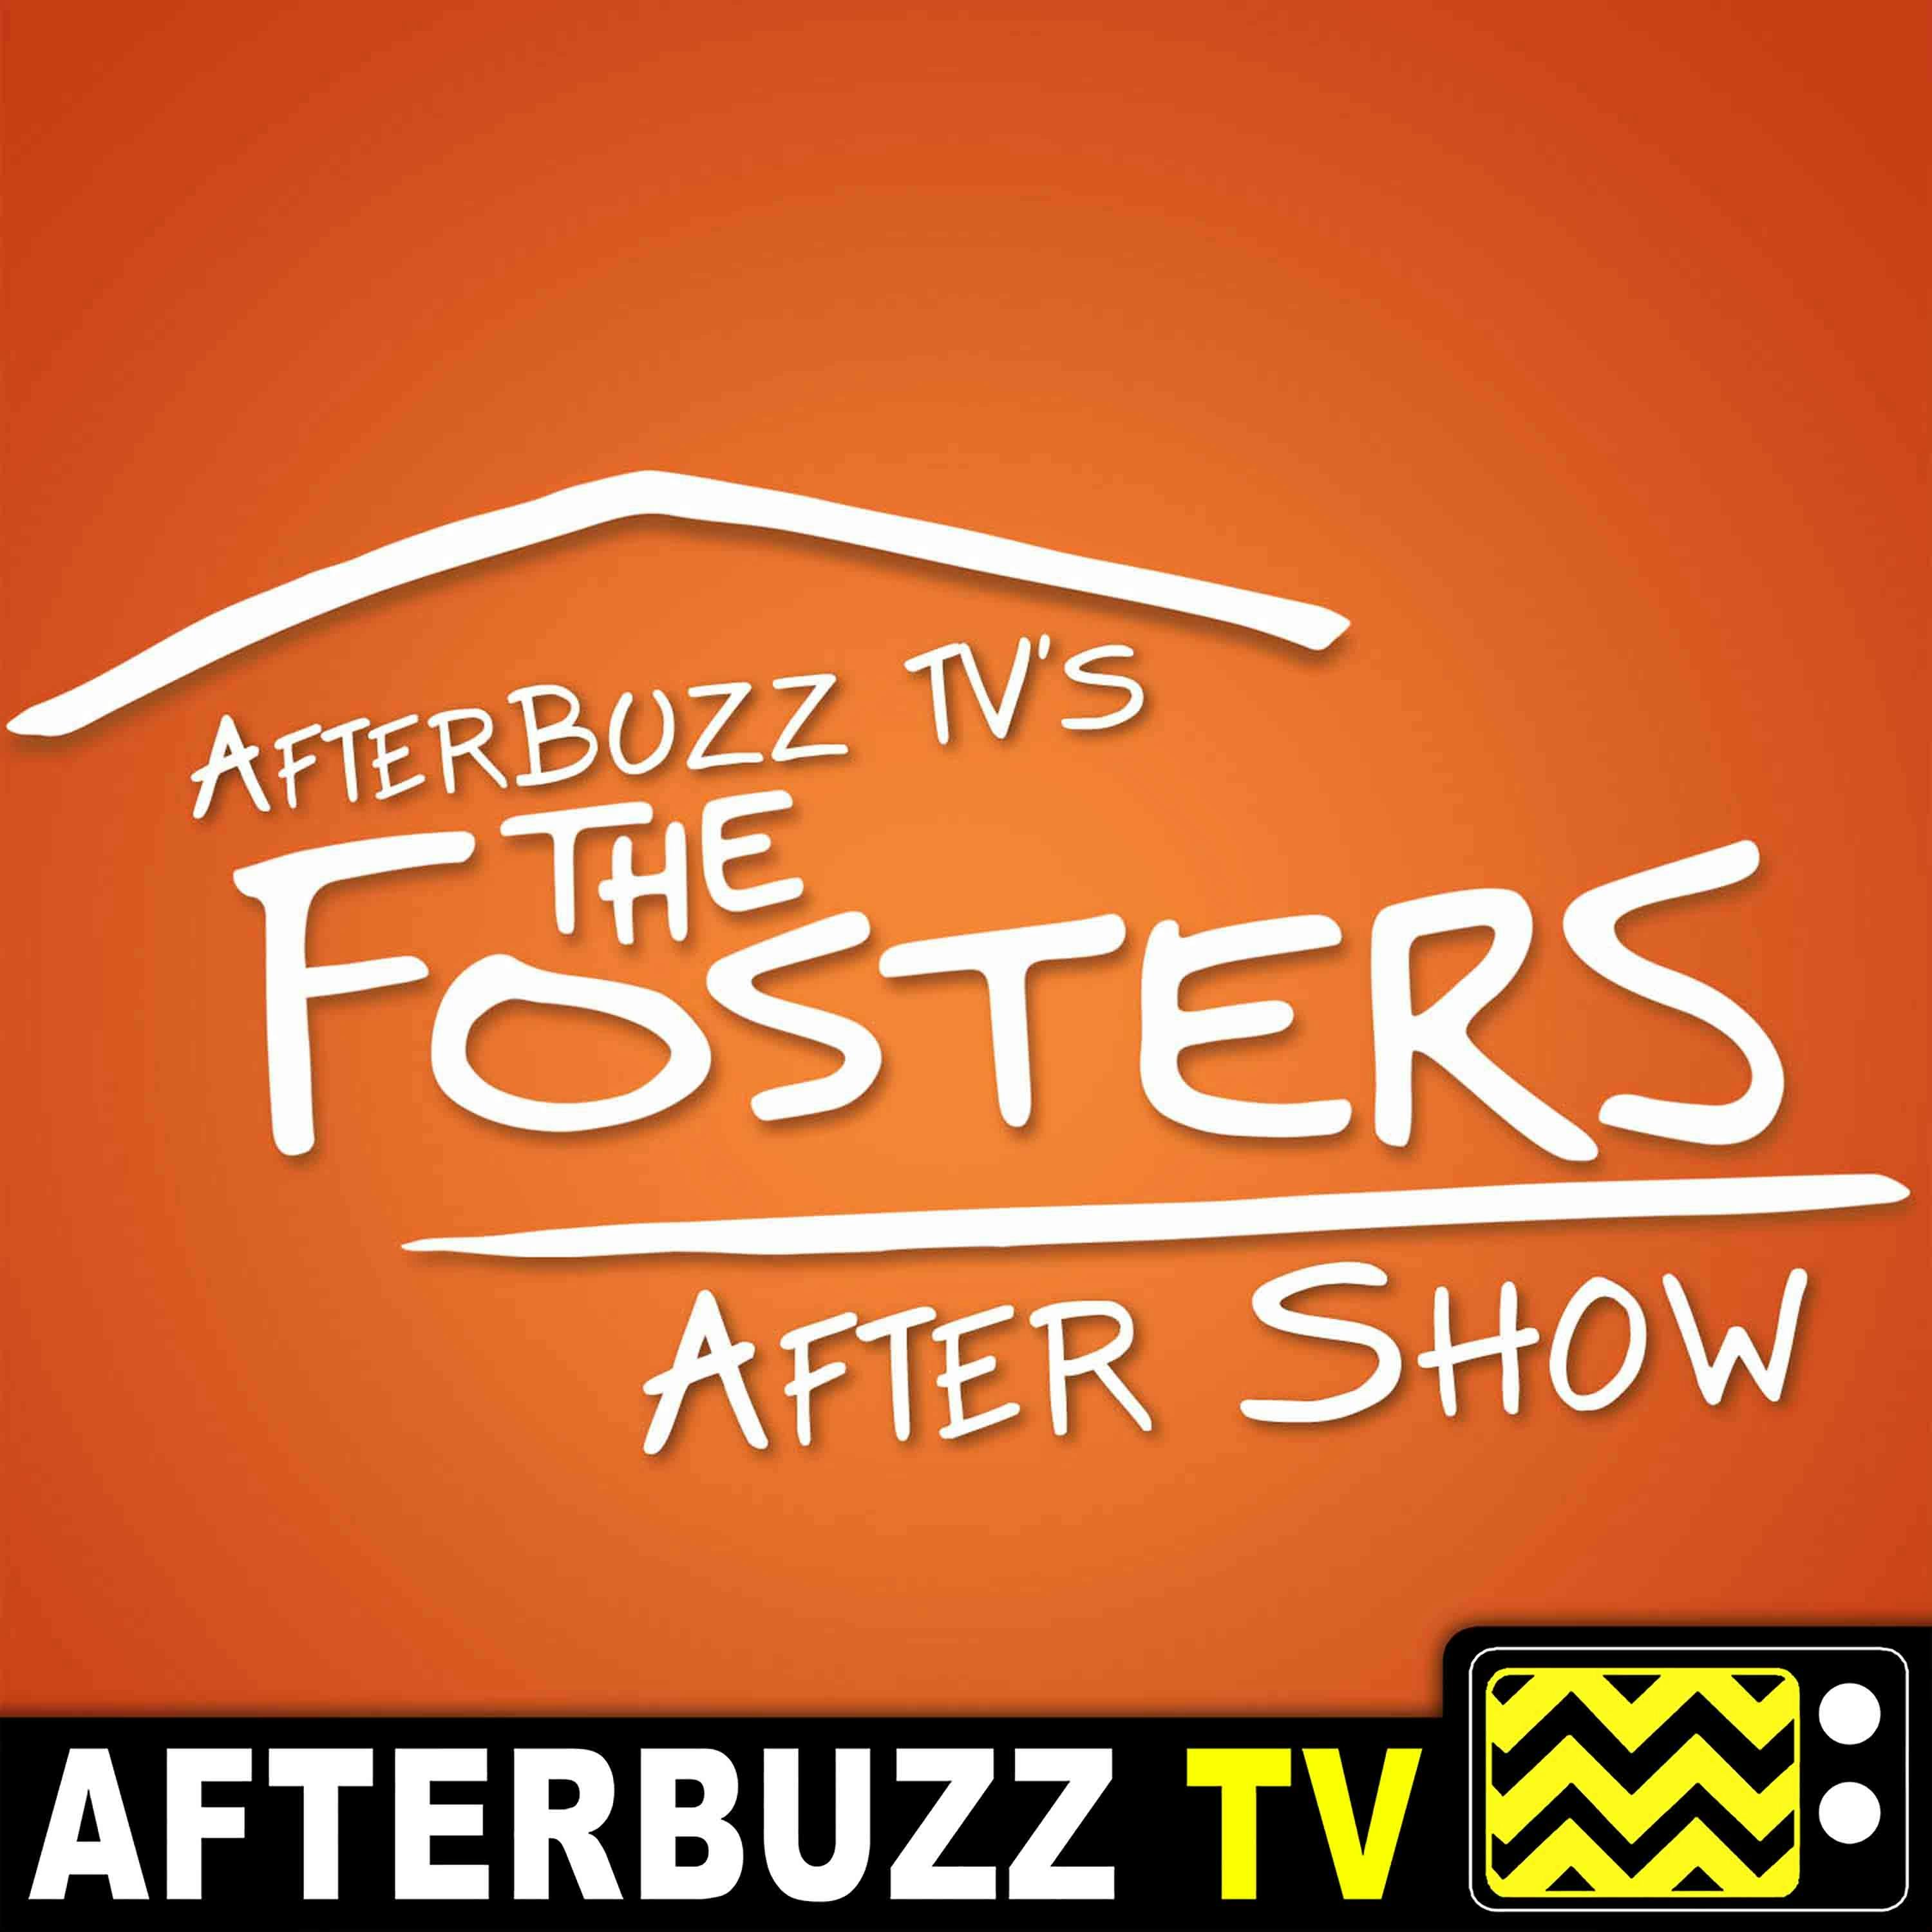 The Fosters S:2 | Hayden Byerly Guests on The Longest Day E:7 | AfterBuzz TV AfterShow